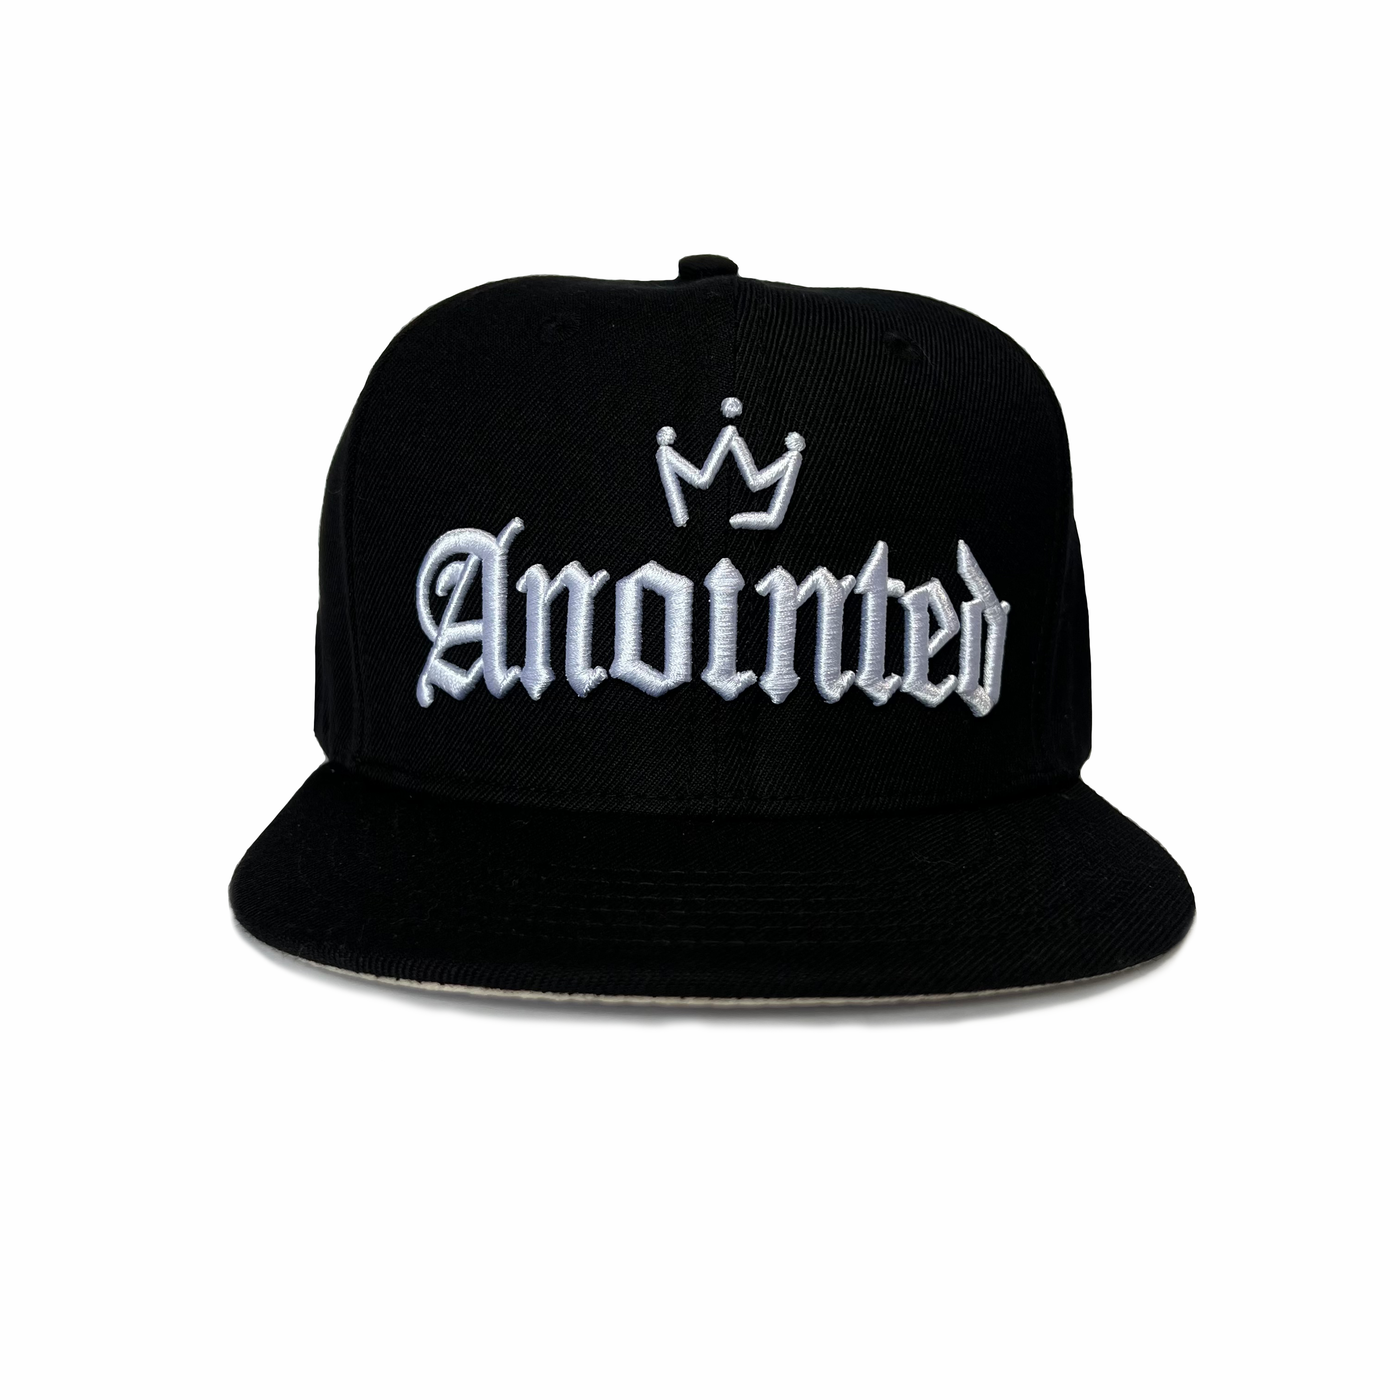 New Anointed 3D Puff - Black Snapback